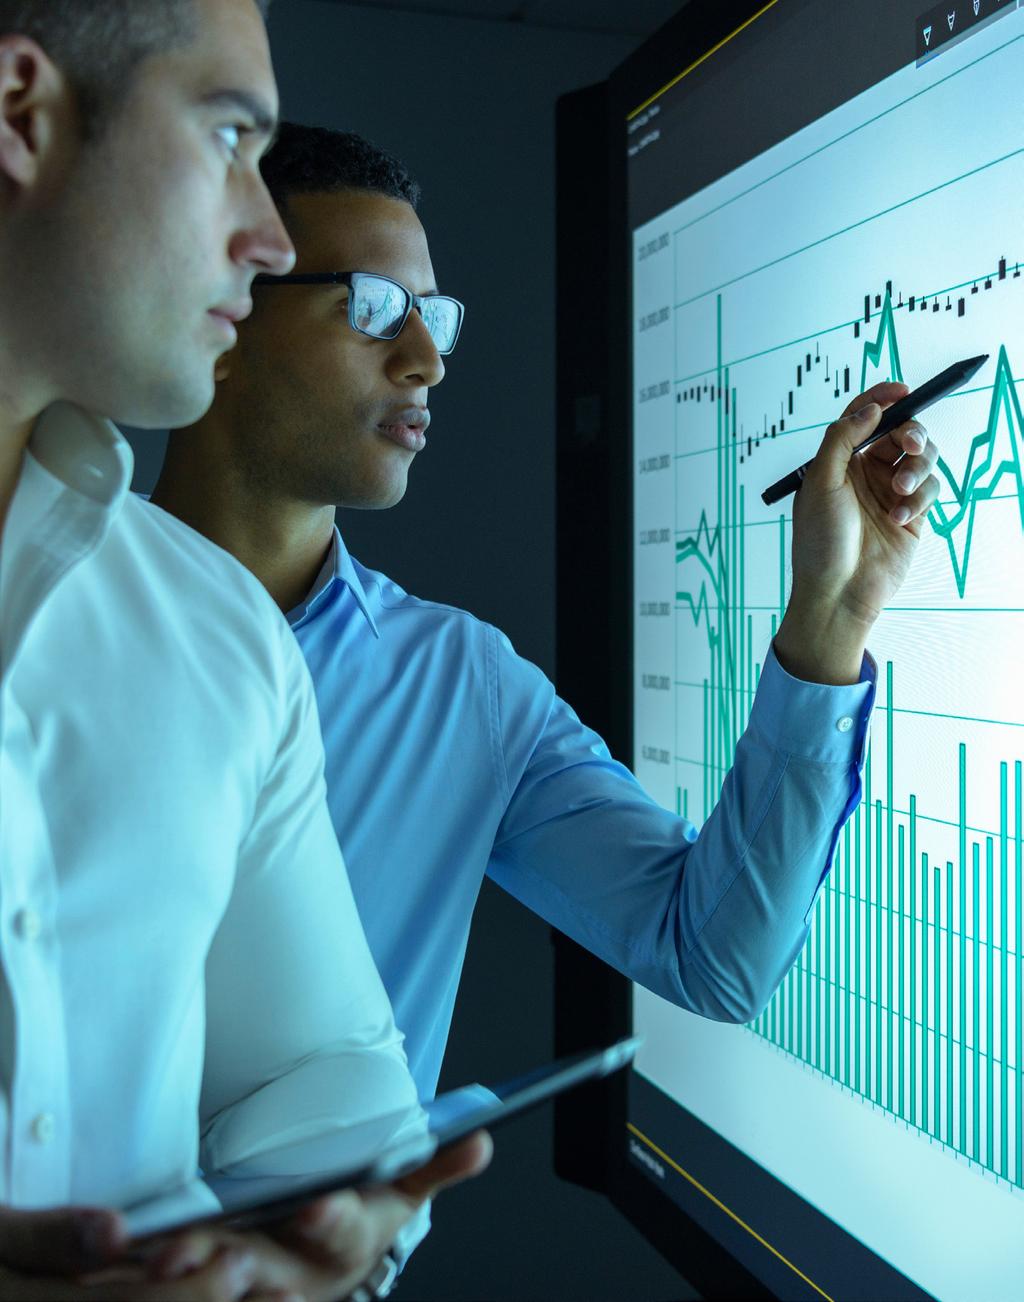 ANALYTICS: THE ACTIONABLE INSIGHTS IMPERATIVE The analytics solution on the 3DEXPERIENCE platform is an important way to extend the value companies realize from innovation-enabled processes.